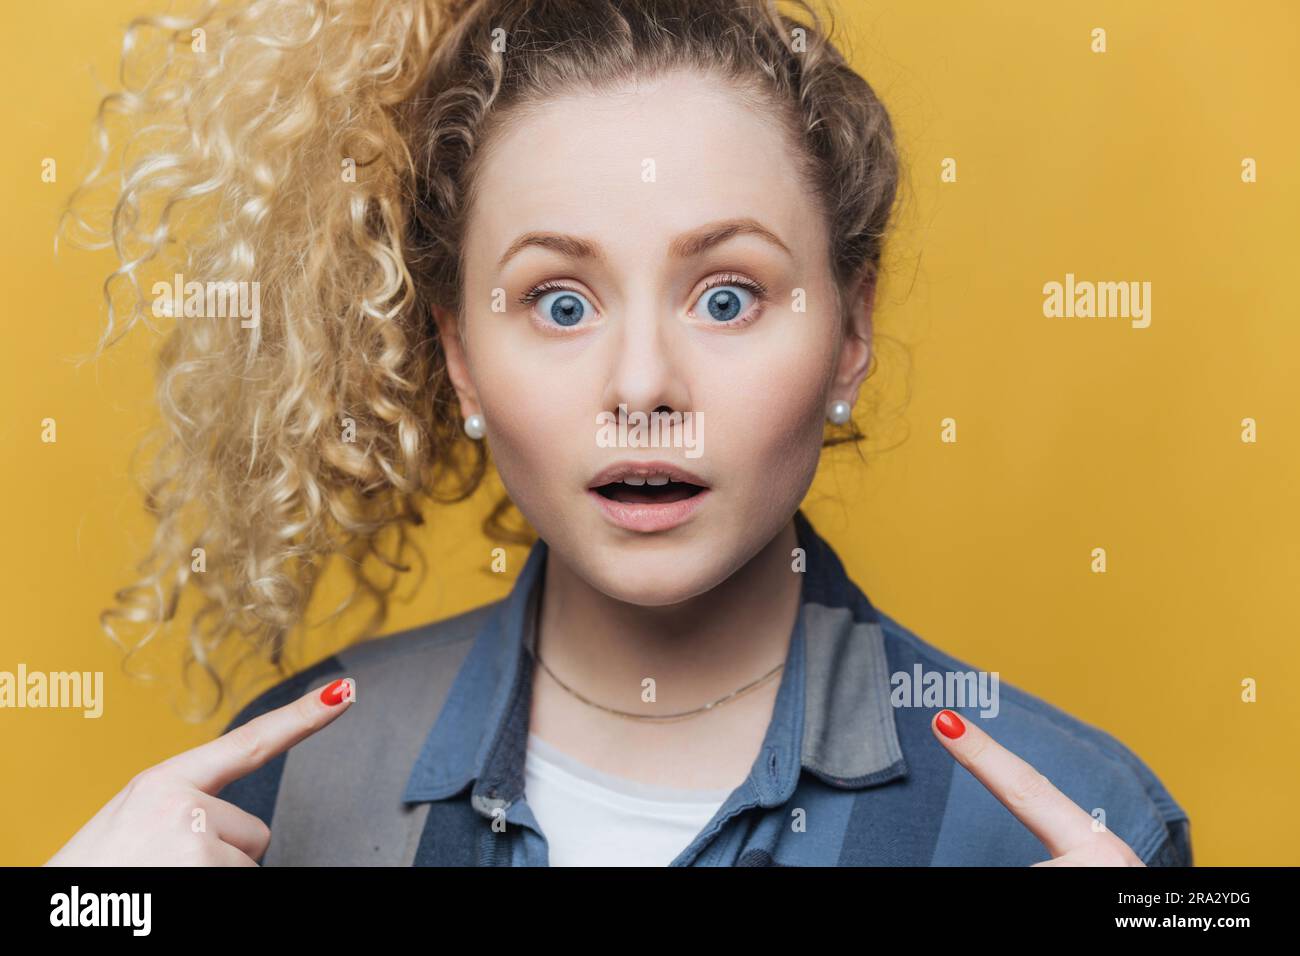 Shocked young woman, casually dressed, gestures at herself in disbelief, isolated on yellow wall. Stock Photo